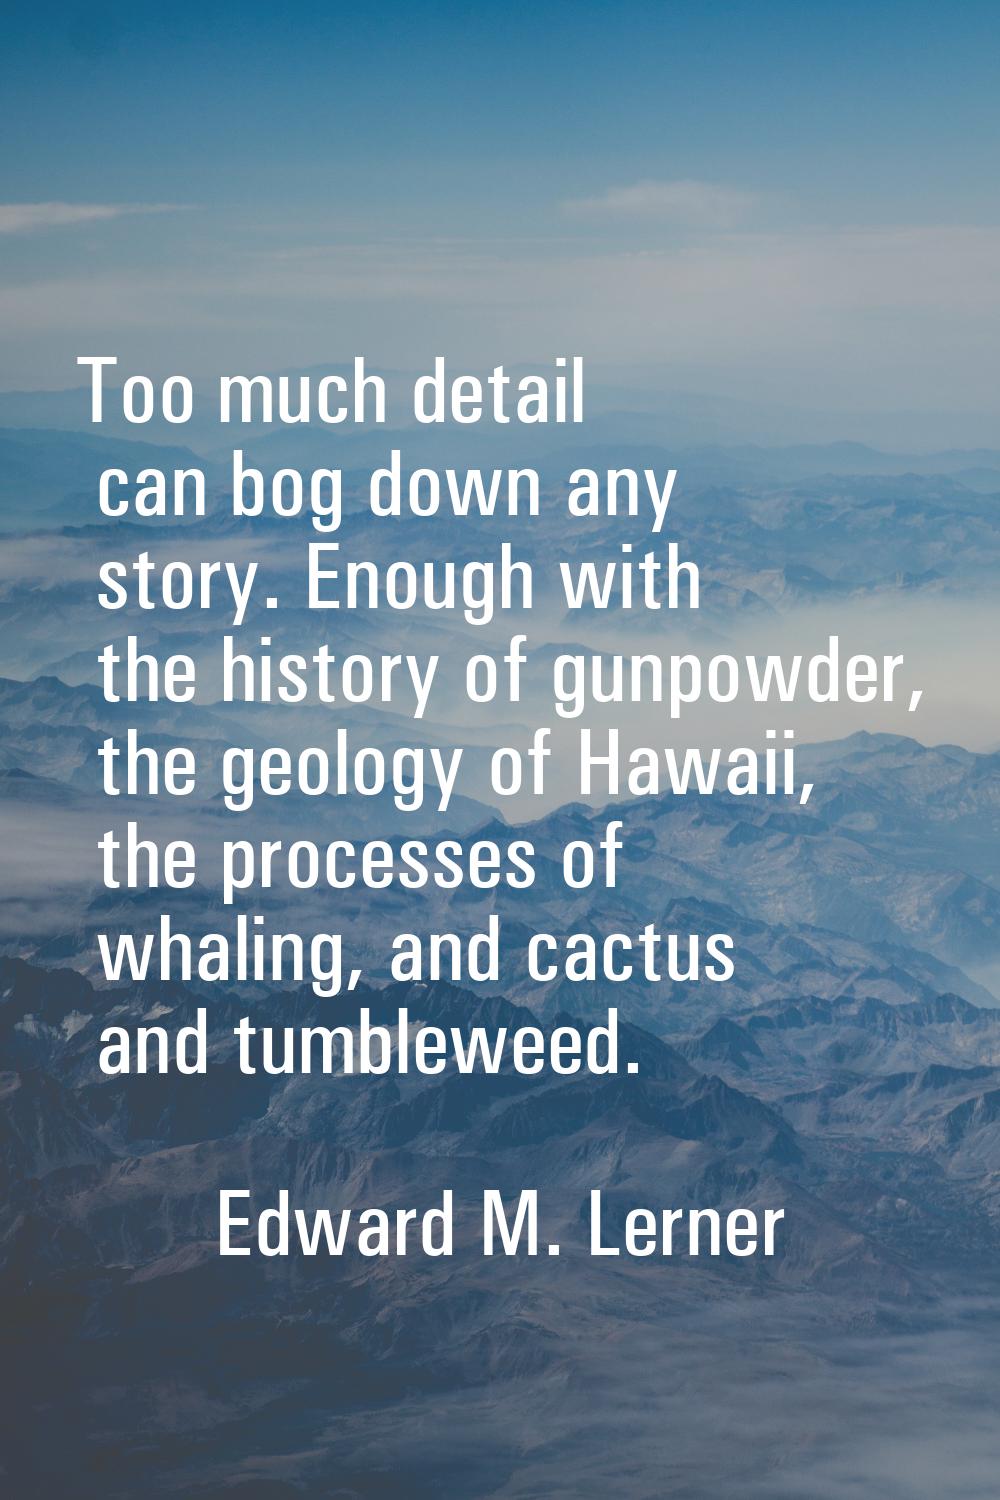 Too much detail can bog down any story. Enough with the history of gunpowder, the geology of Hawaii